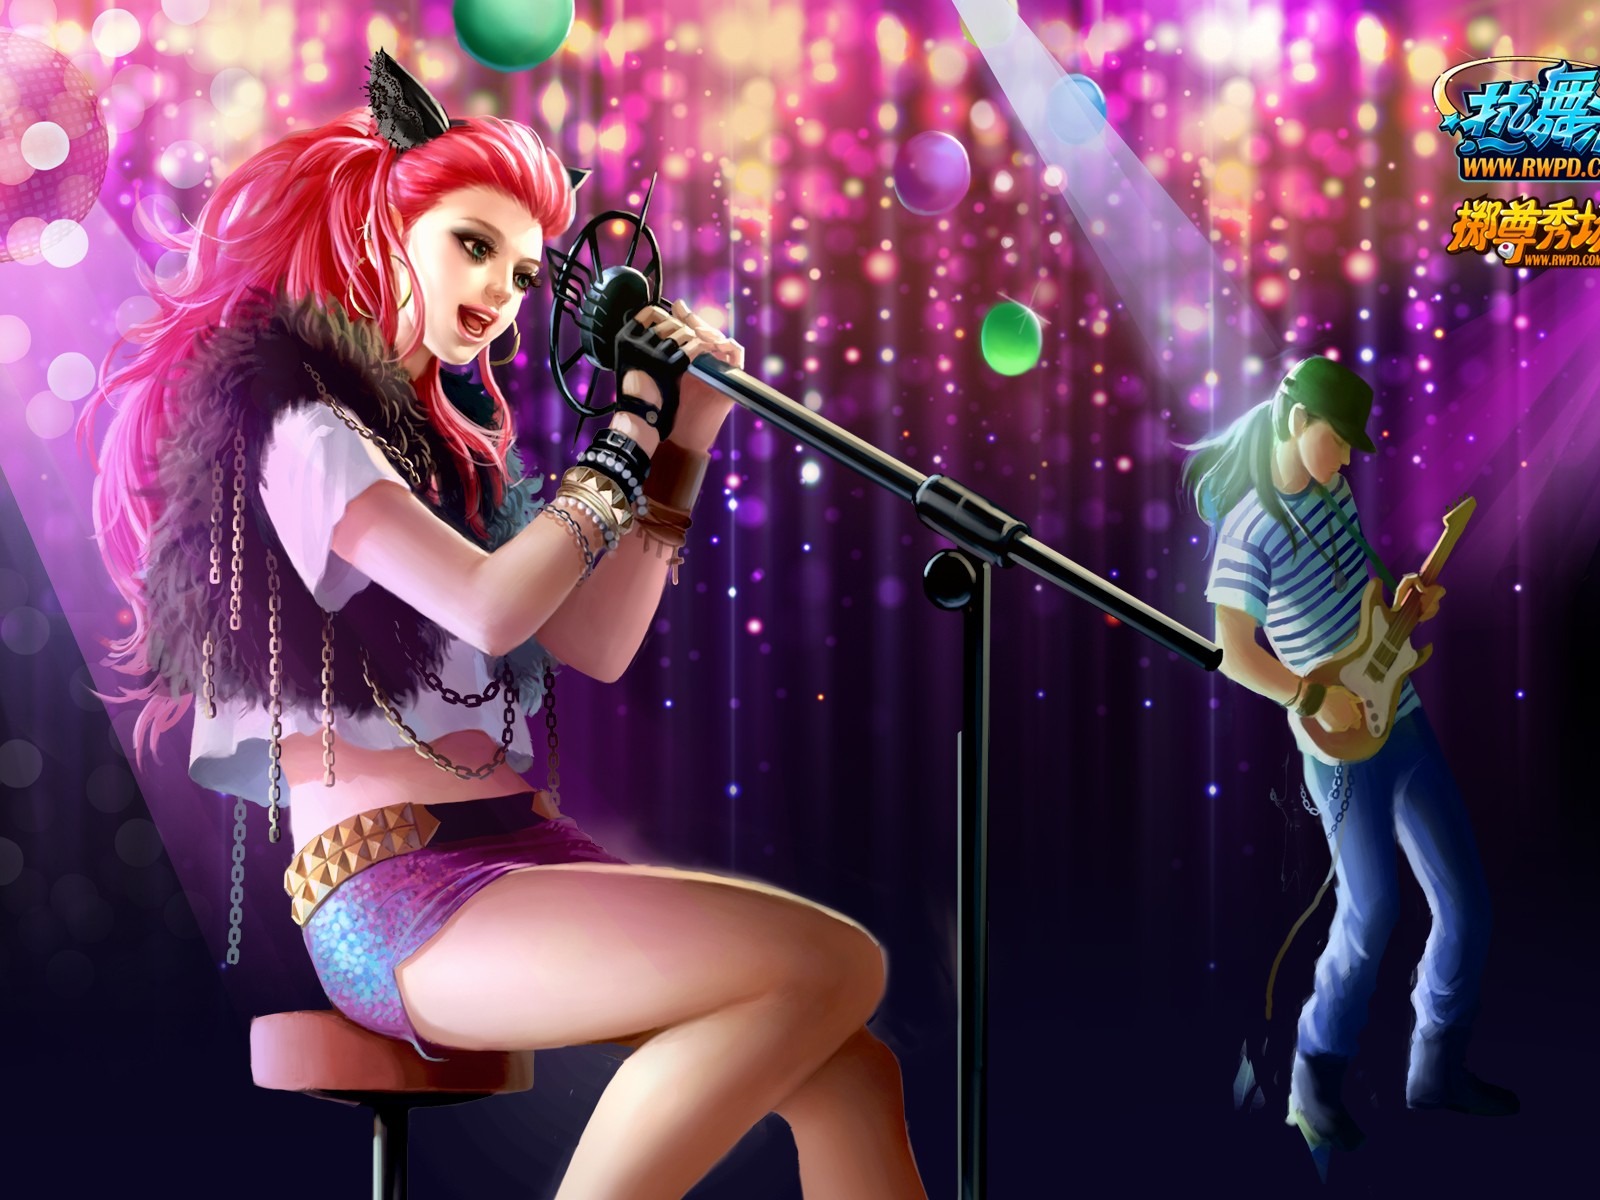 Online game Hot Dance Party II official wallpapers #38 - 1600x1200